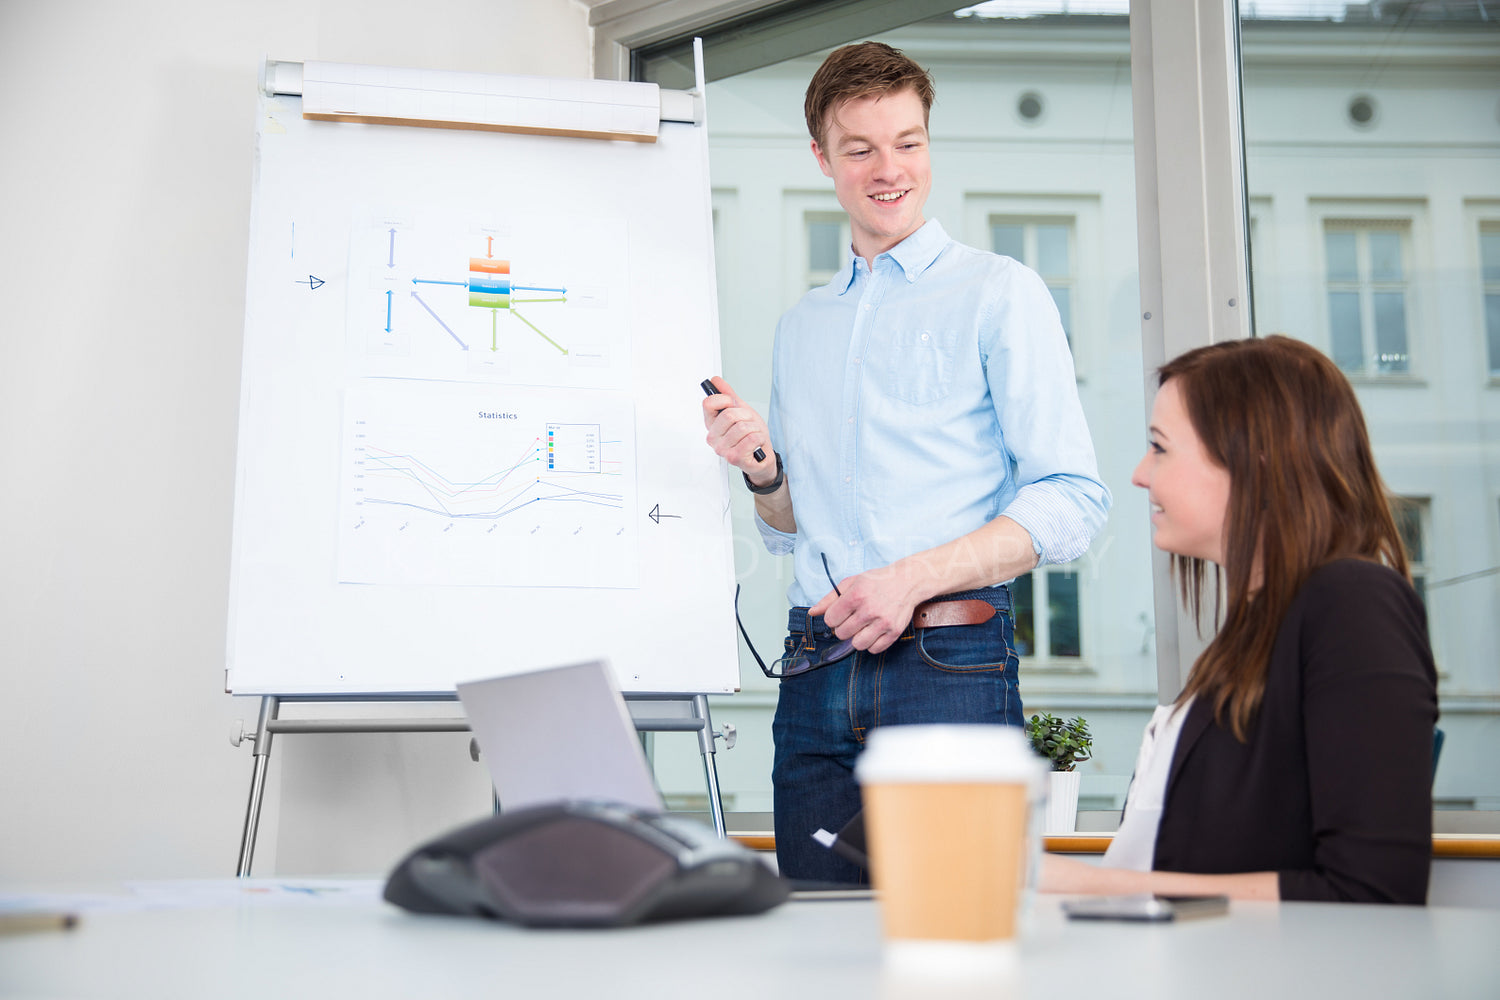 Smiling Businessman Giving Presentation To Colleague In Office